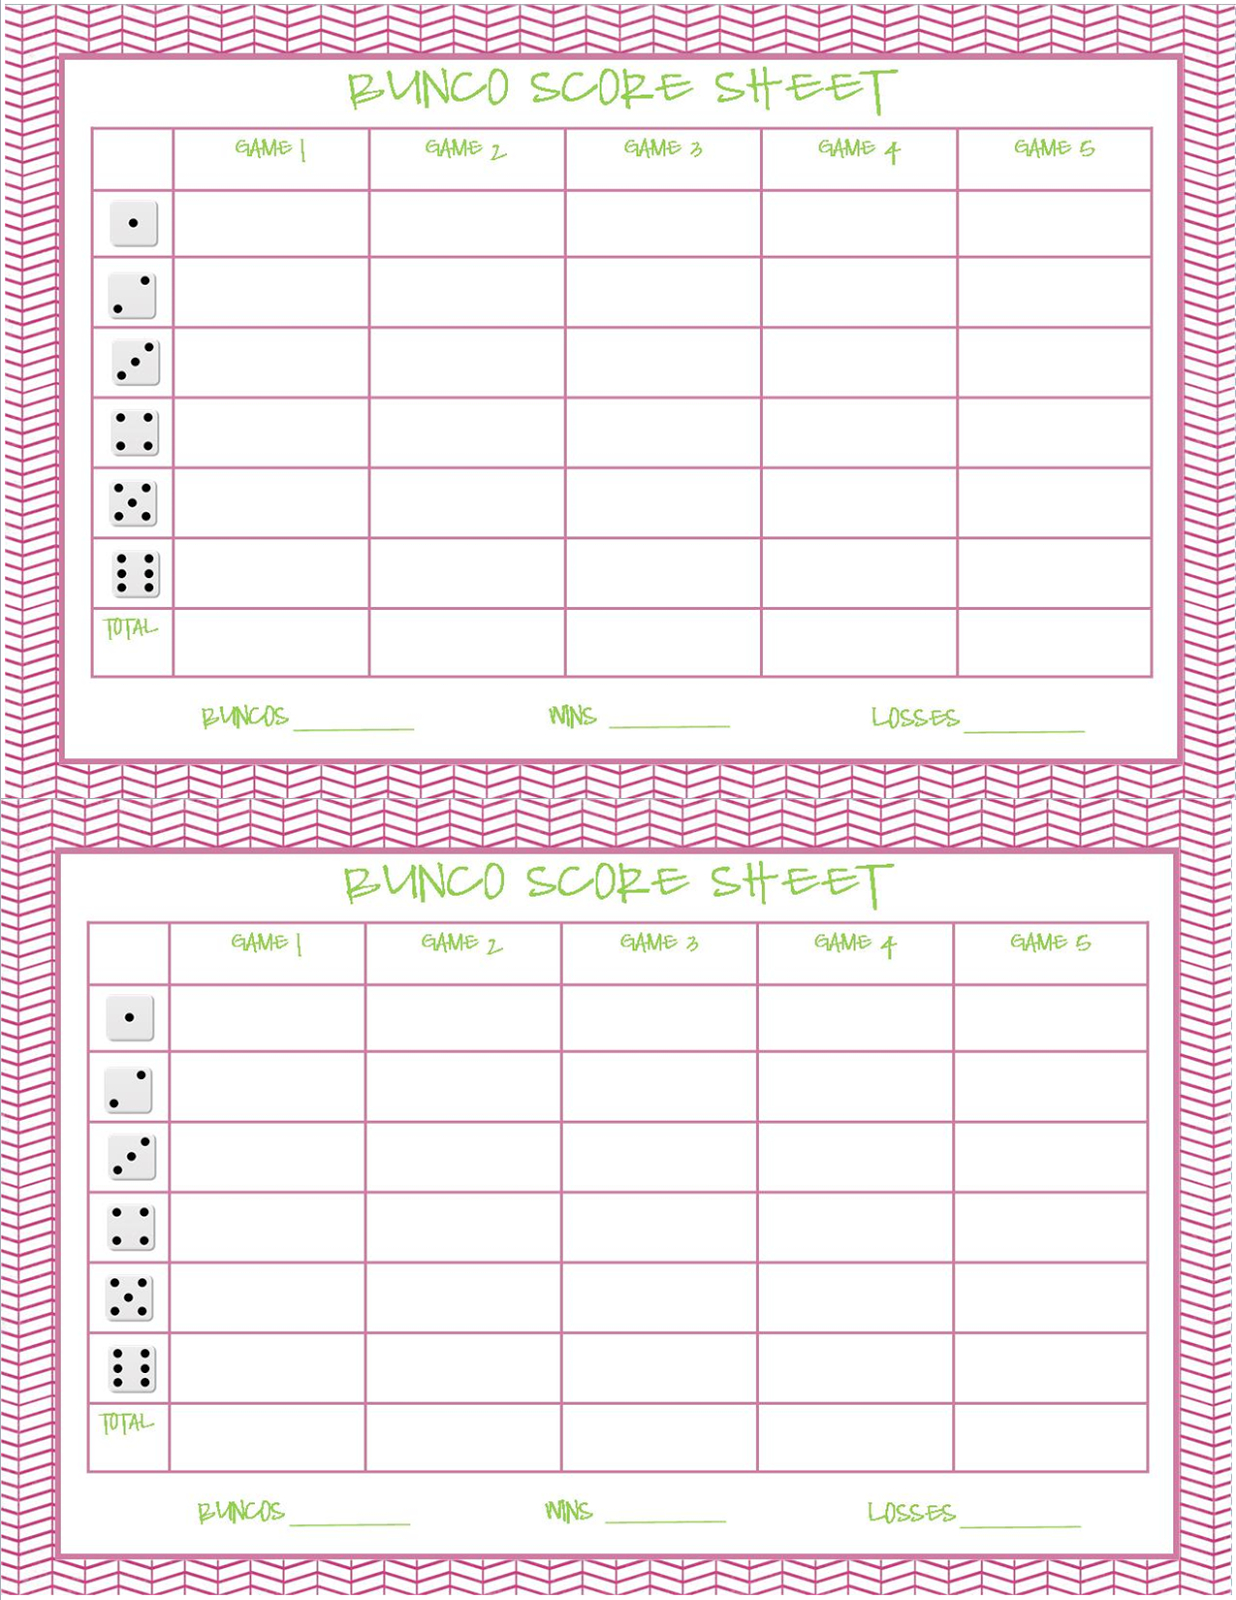 Free Printable Bunco Score Sheets Only | Feel Free To Print It Out - Free Printable Bunco Game Sheets